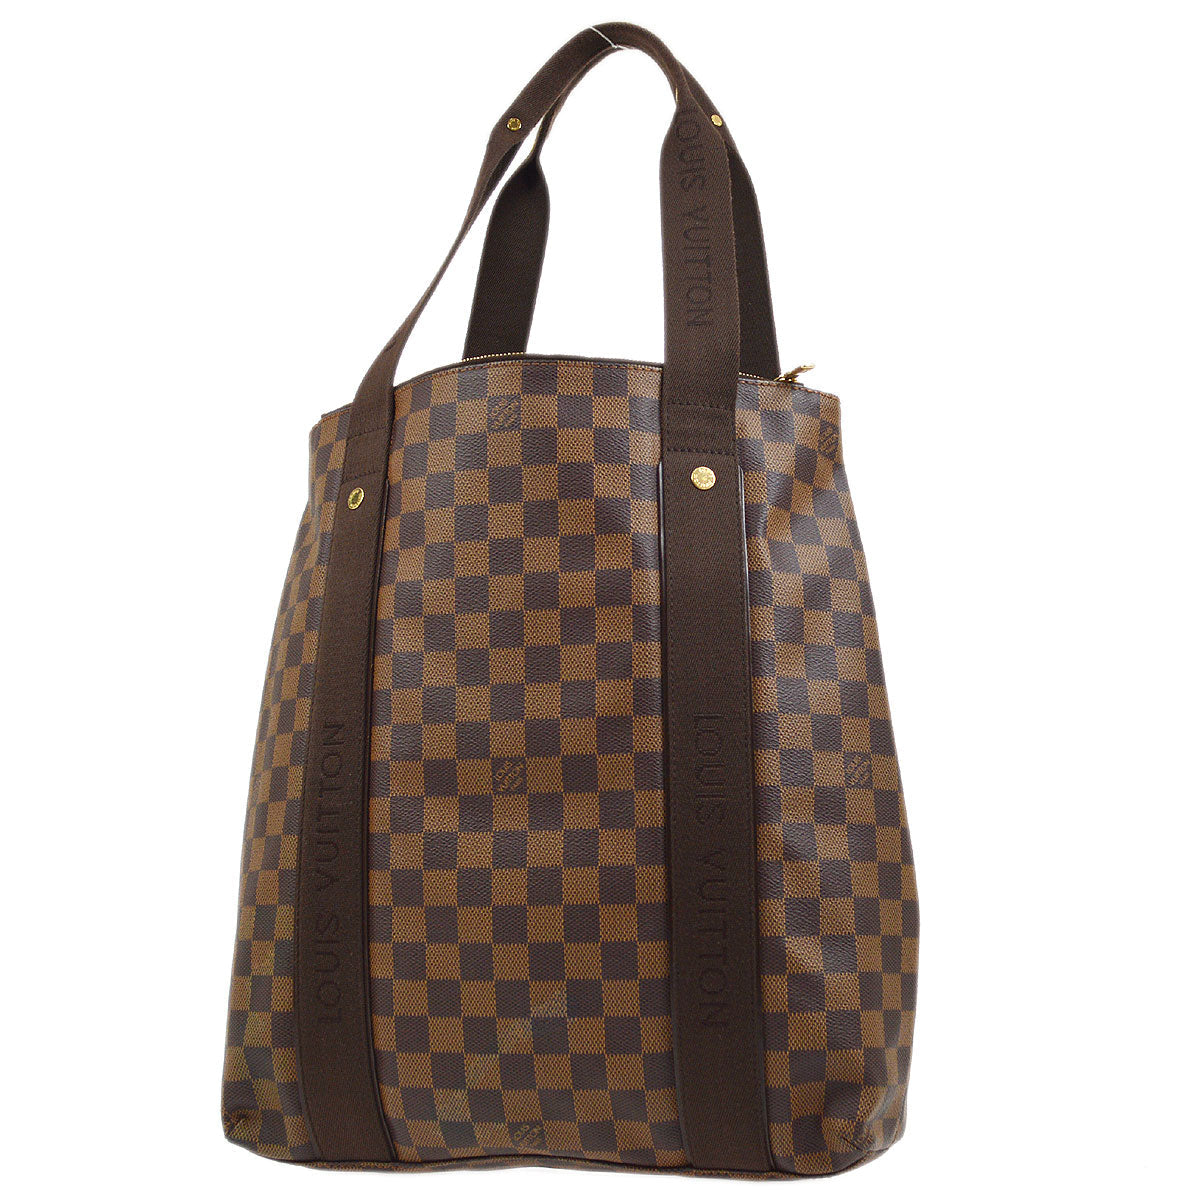 Louis Vuitton 2008 pre-owned Cabas Beaubourg tote bag, Brown